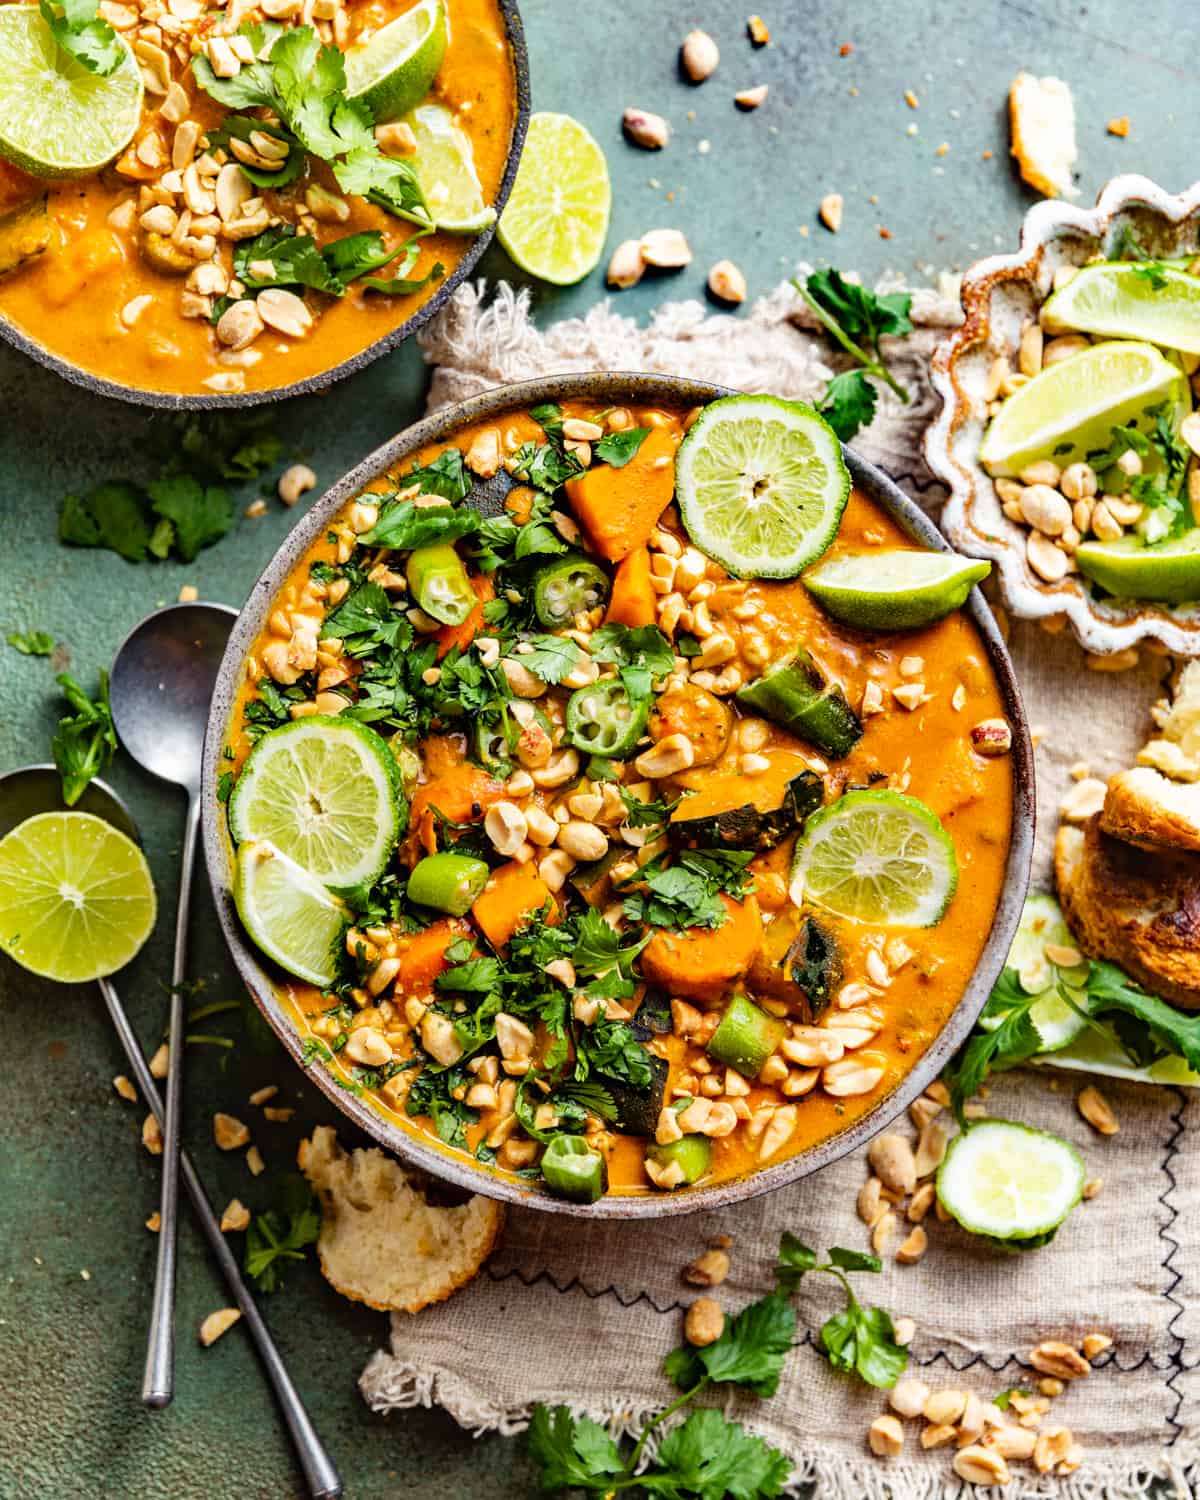 peanut butter soup in a bowl garnished with limes, peanuts, and cilantro.